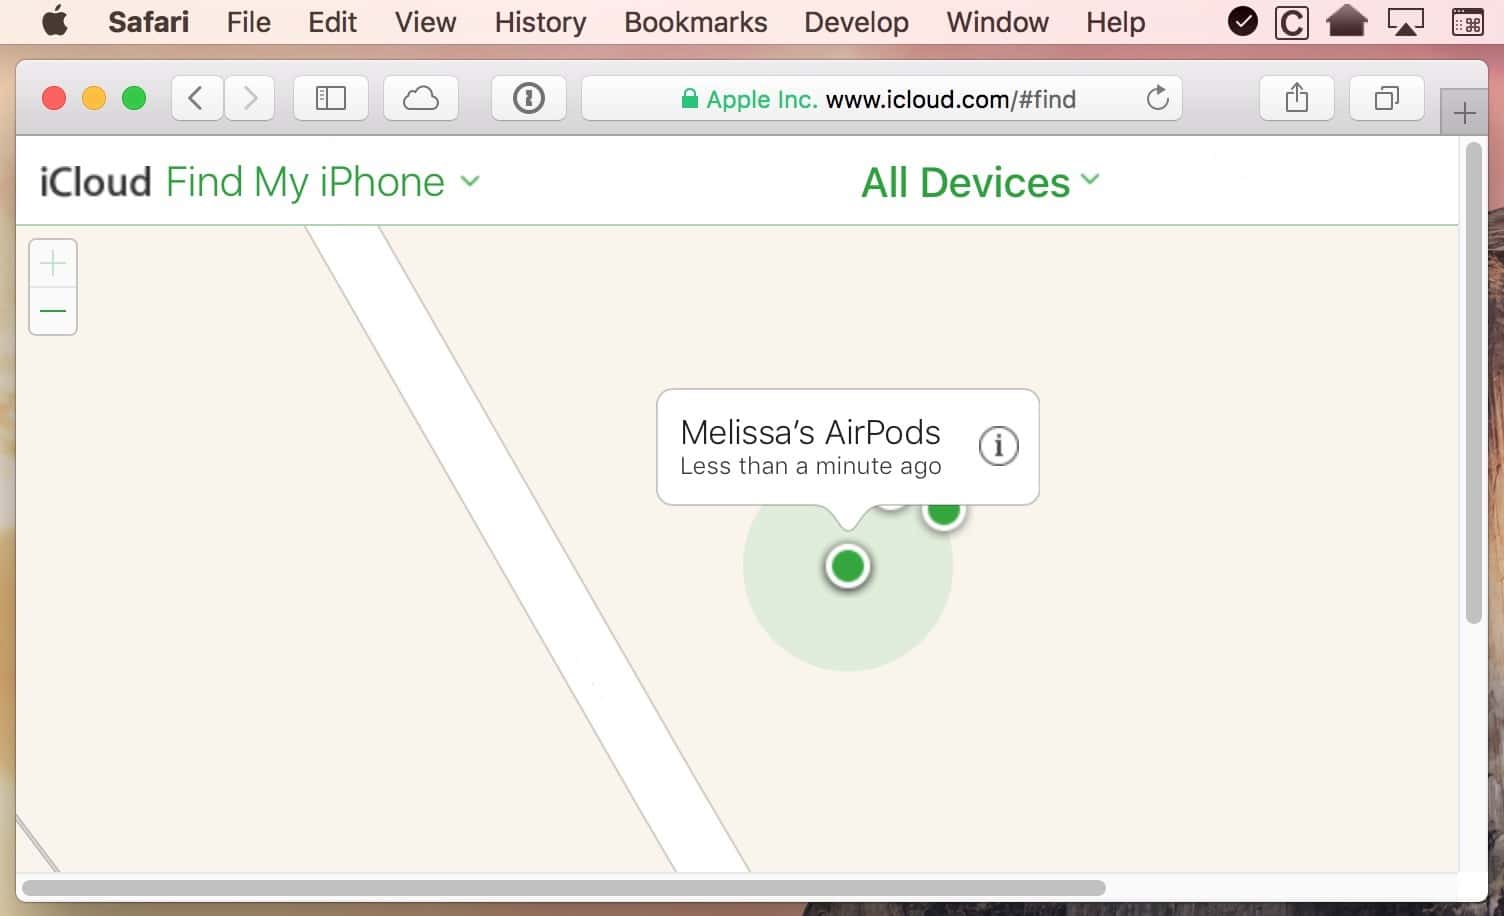 iCloud.com includes a Find my iPhone page you can use to locate your AirPods